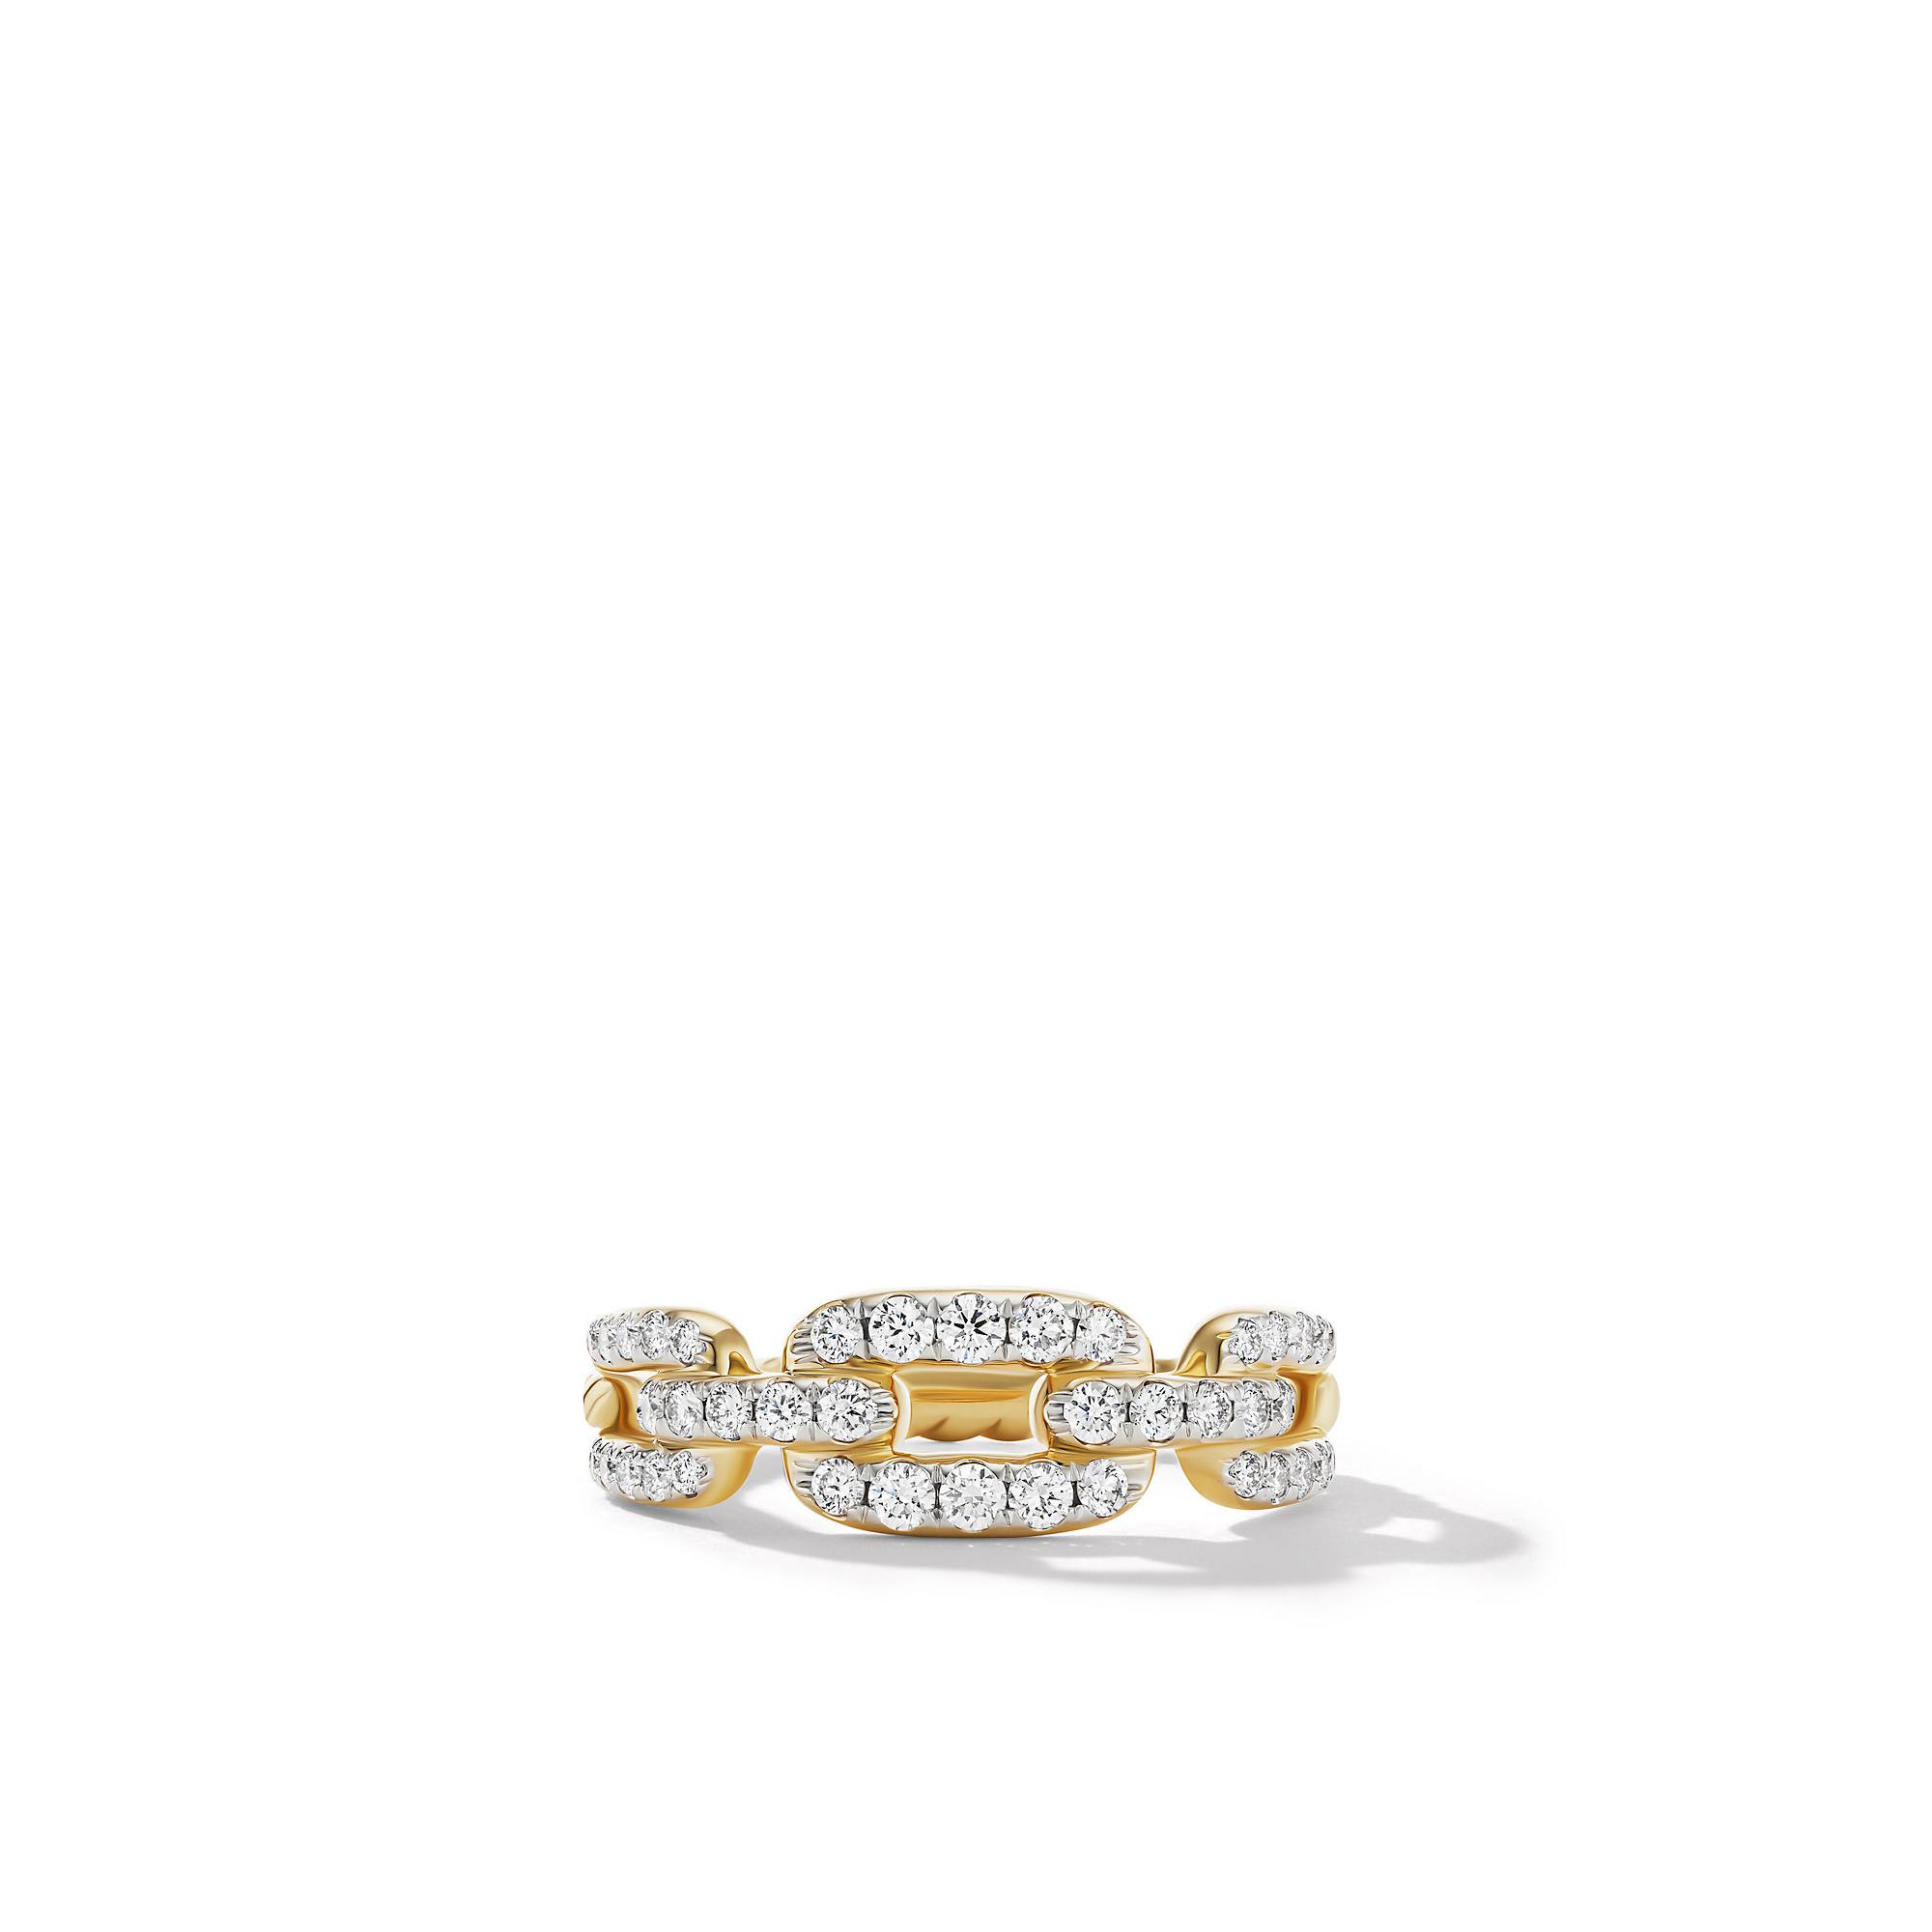 David Yurman Stax Chain Link Ring in 18K Yellow Gold with Pave Diamonds and Emerald 2